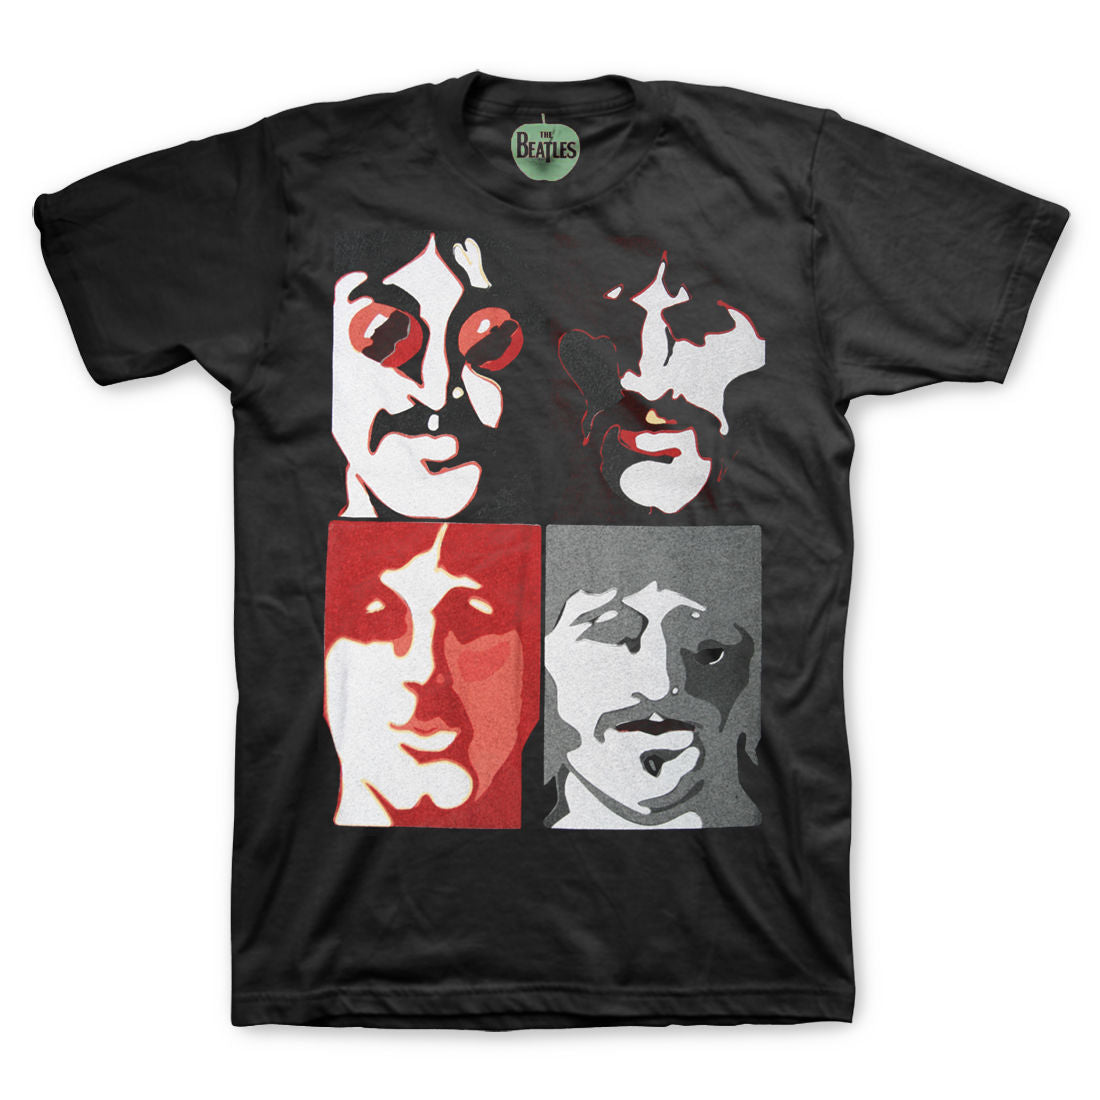 The Beatles - Four Square YS Abstract T-Shirt